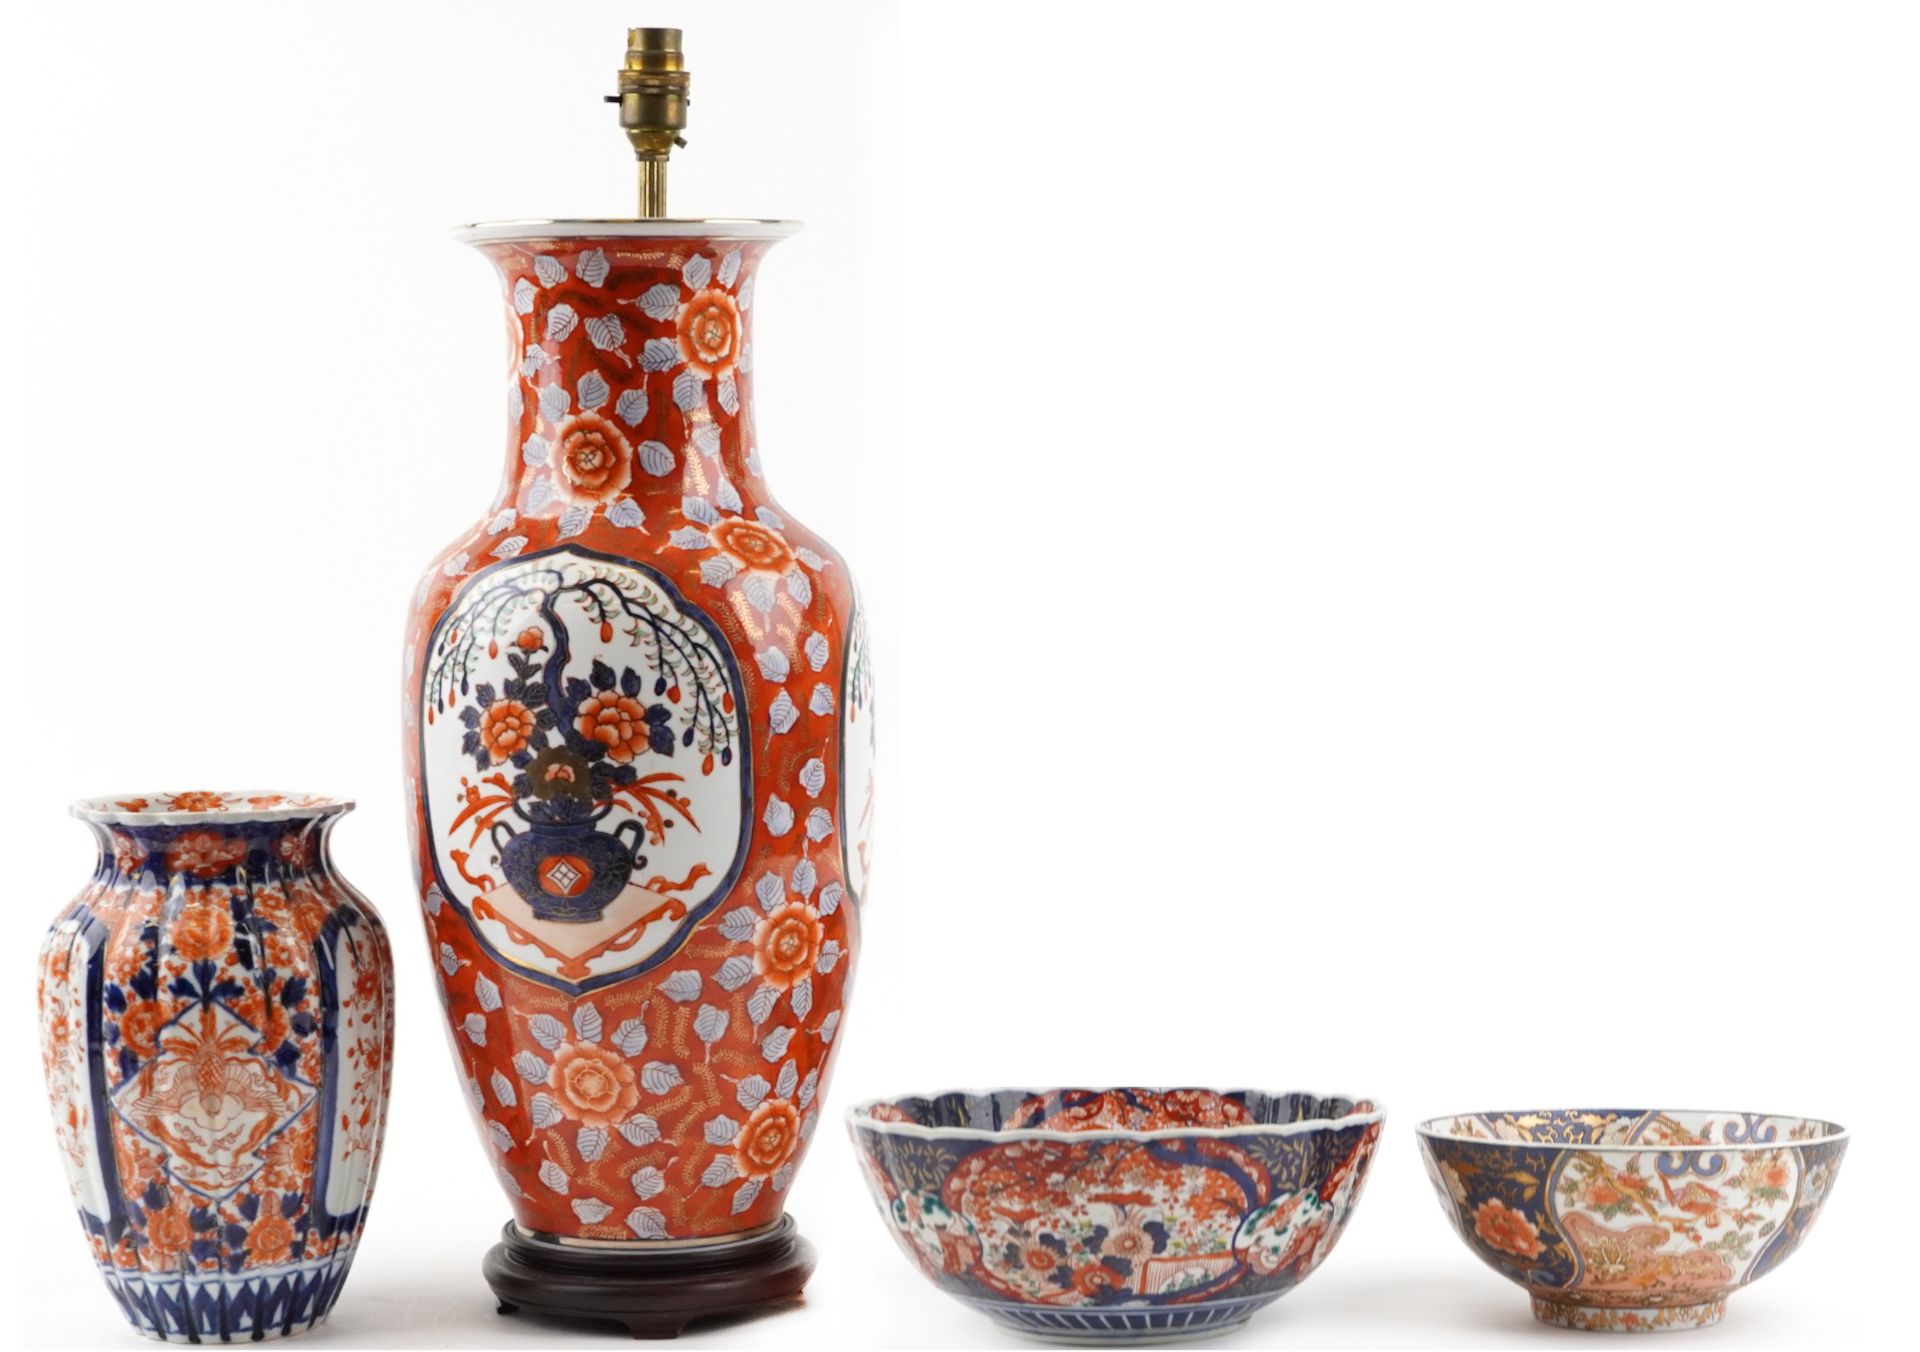 Japanese Imari porcelain including a large vase table lamp, fluted vase hand painted with flowers - Image 4 of 6